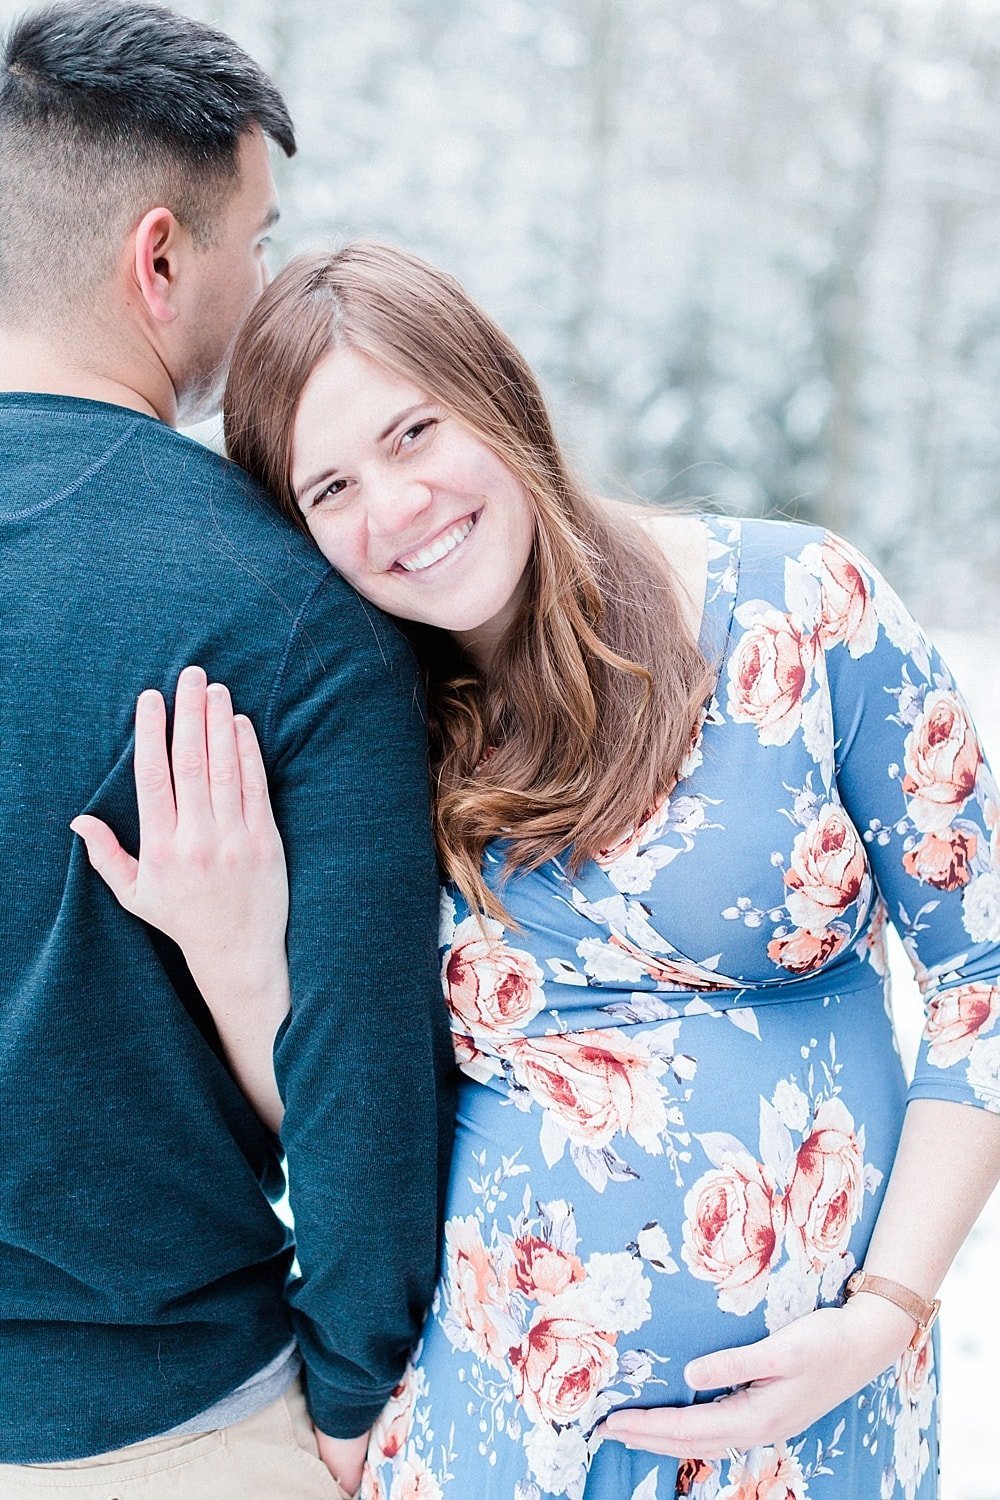 Snowy winter maternity session photographed by Alicia Yarrish Photography